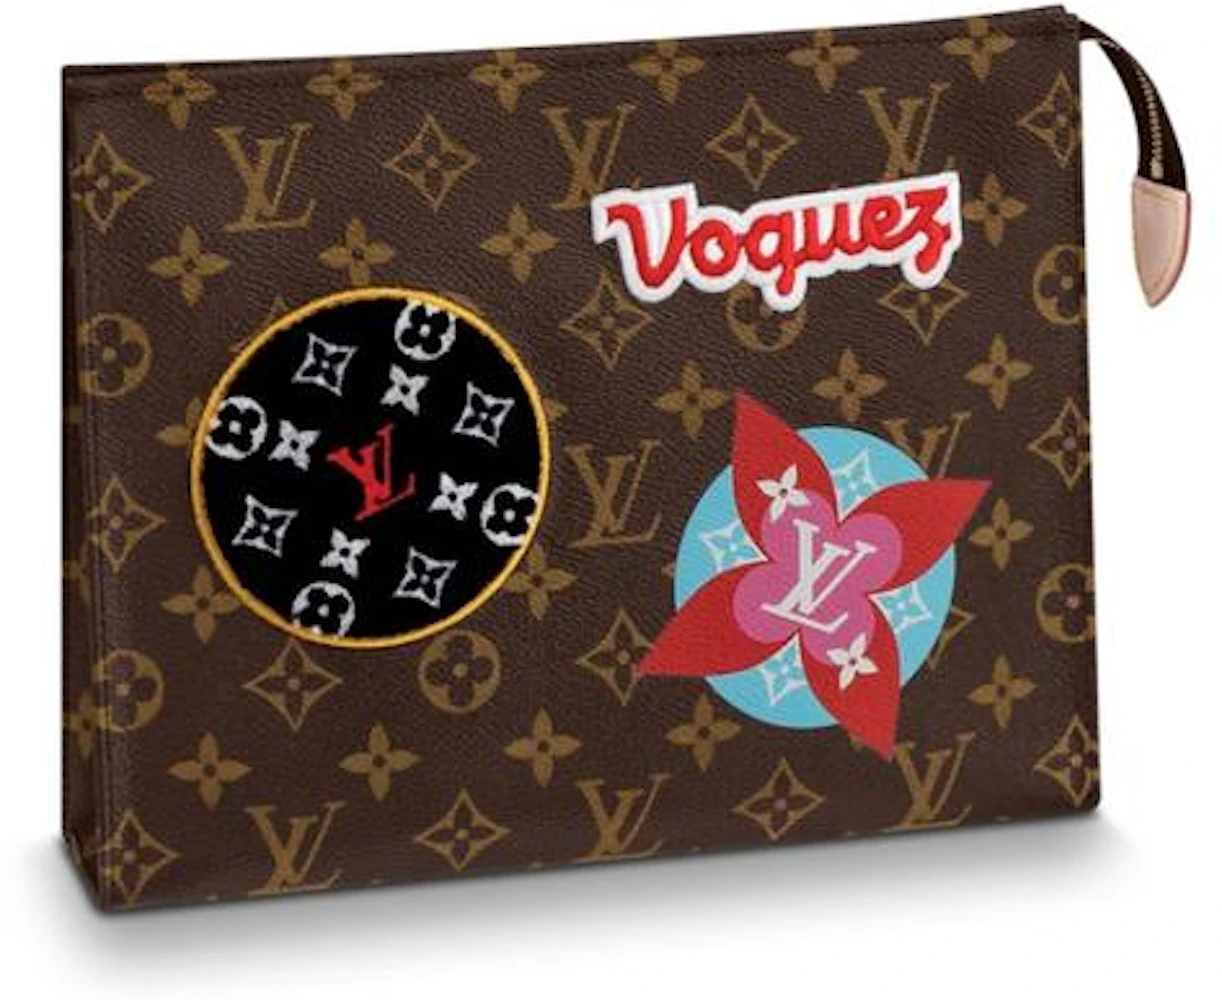 LOUIS VUITTON TOILETRY POUCH 26 REVIEW  WHAT FITS IN IT #LOUISVUITTON  #LUXURY #WHATFITSINMYBAG 